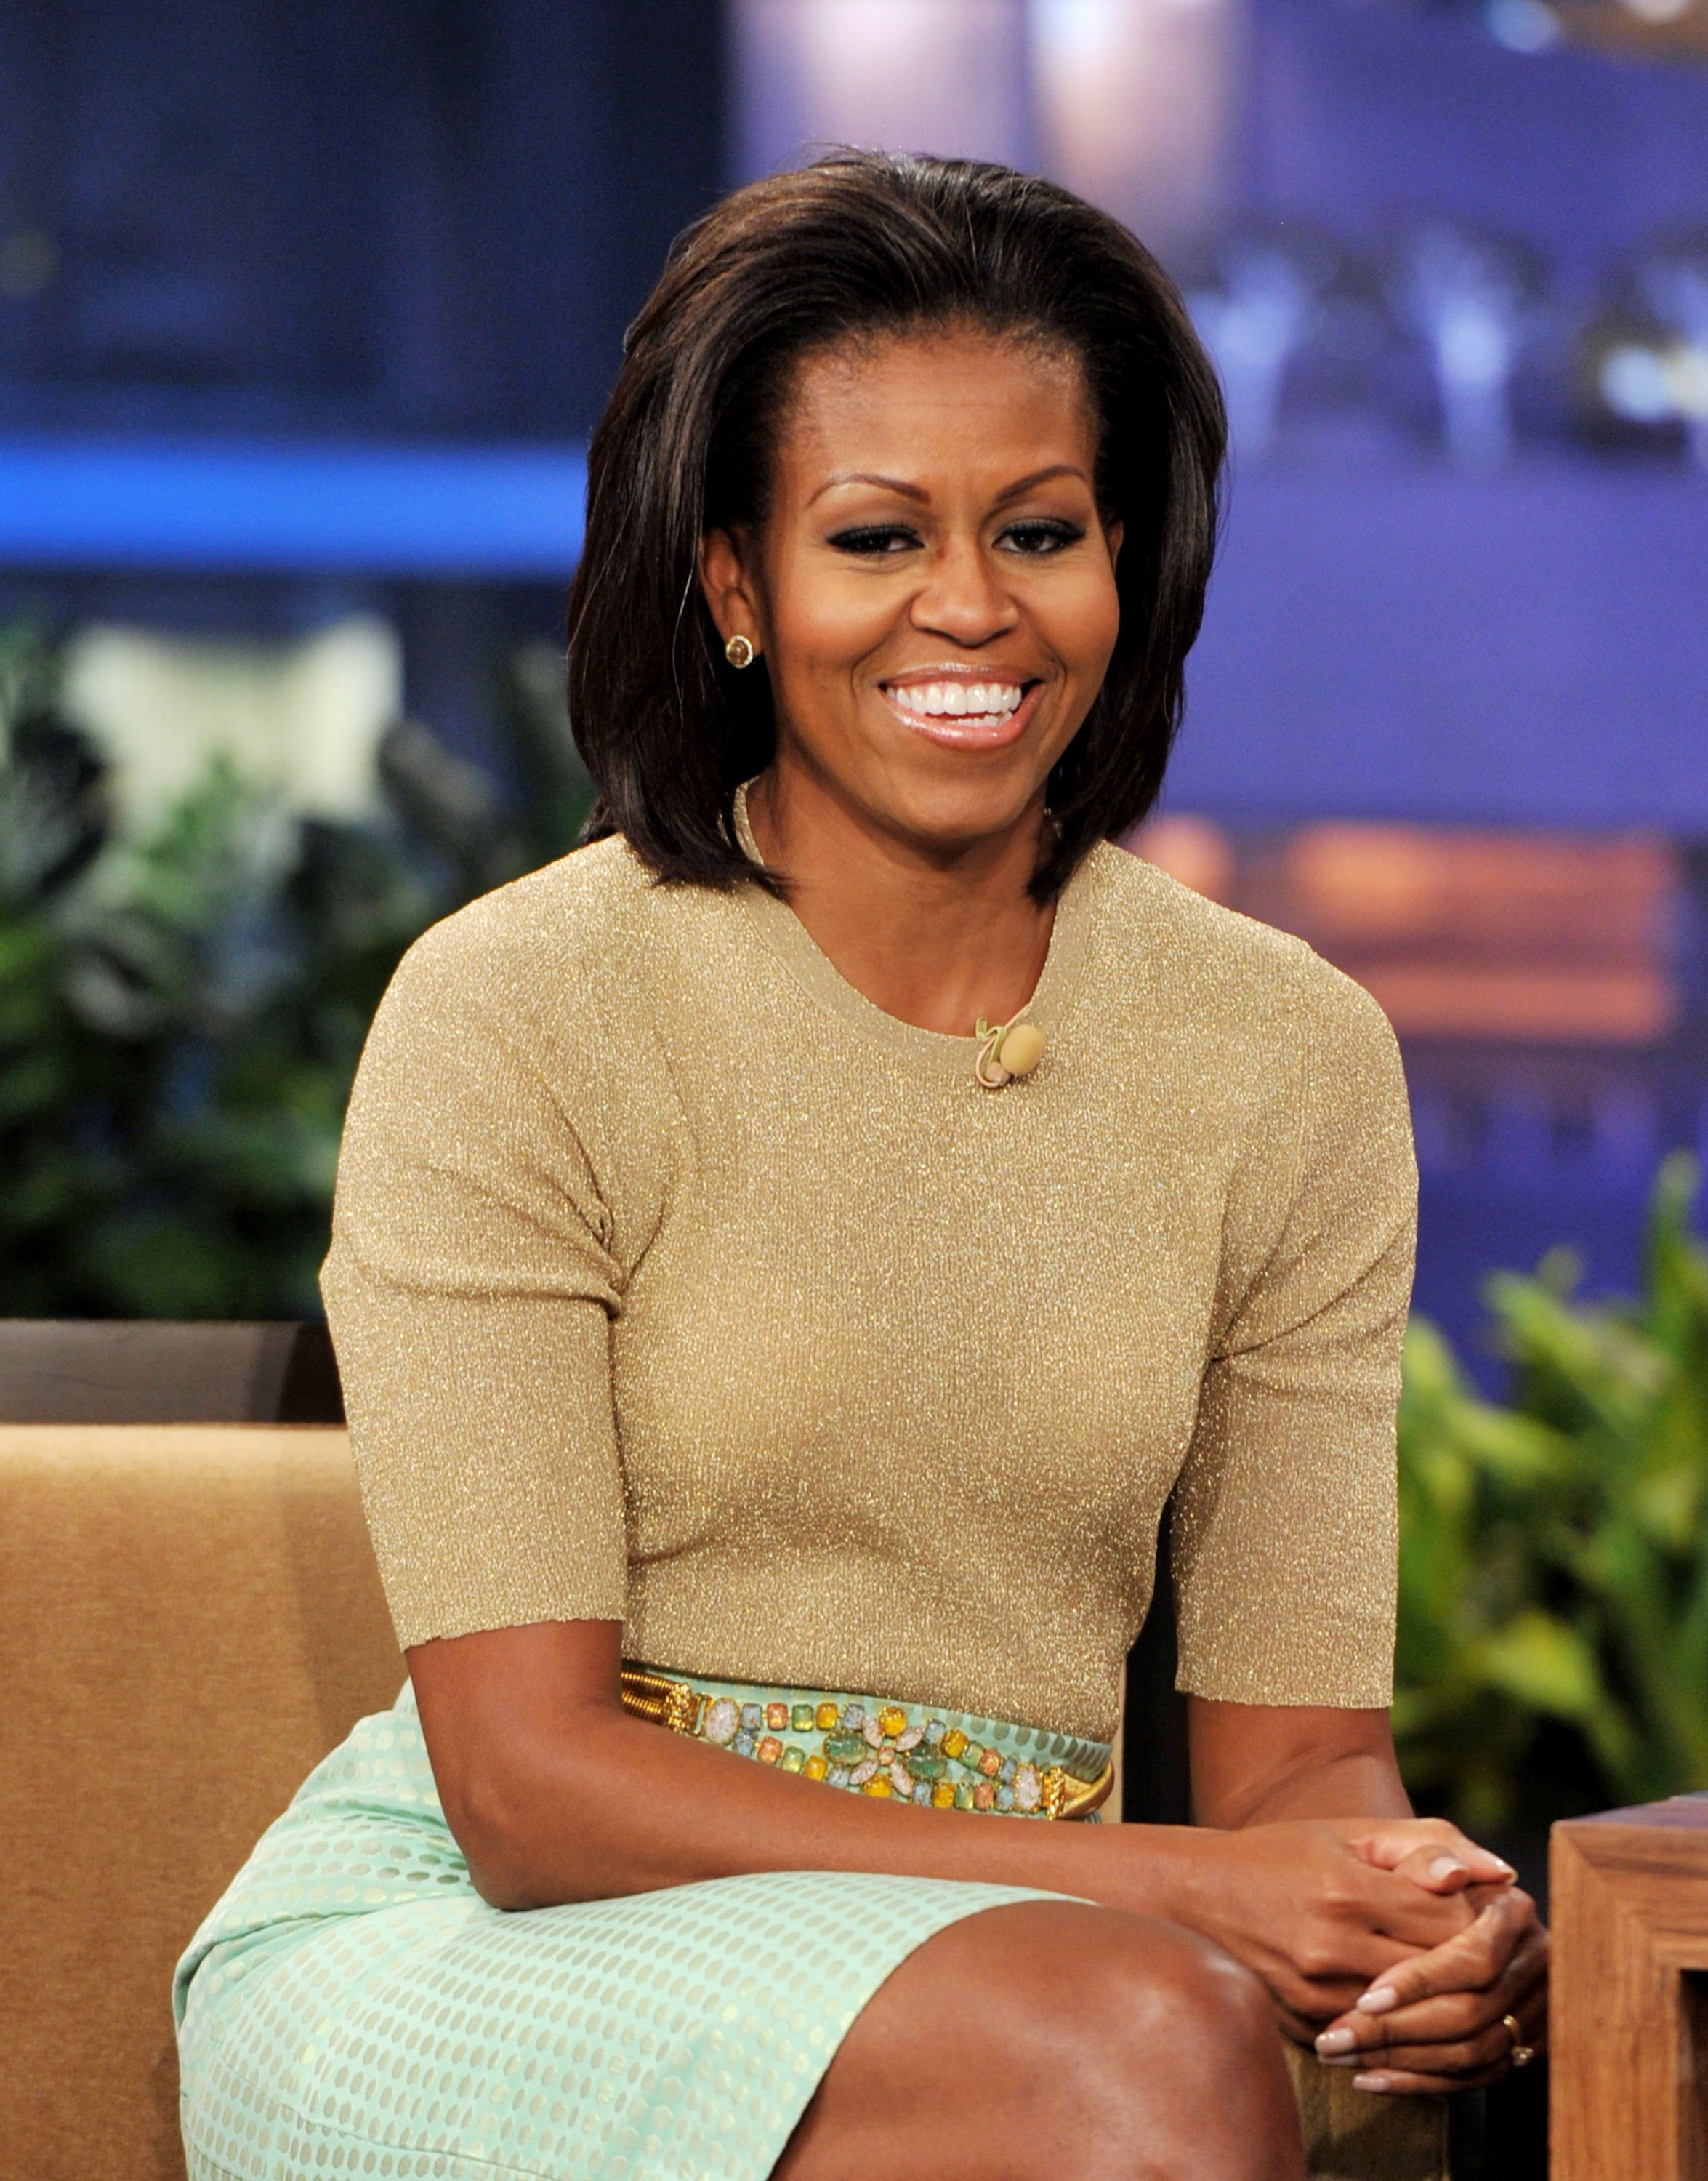 Michelle Obama on "The Tonight Show with Jay Leno" in January 2012. | Photo: Getty Images